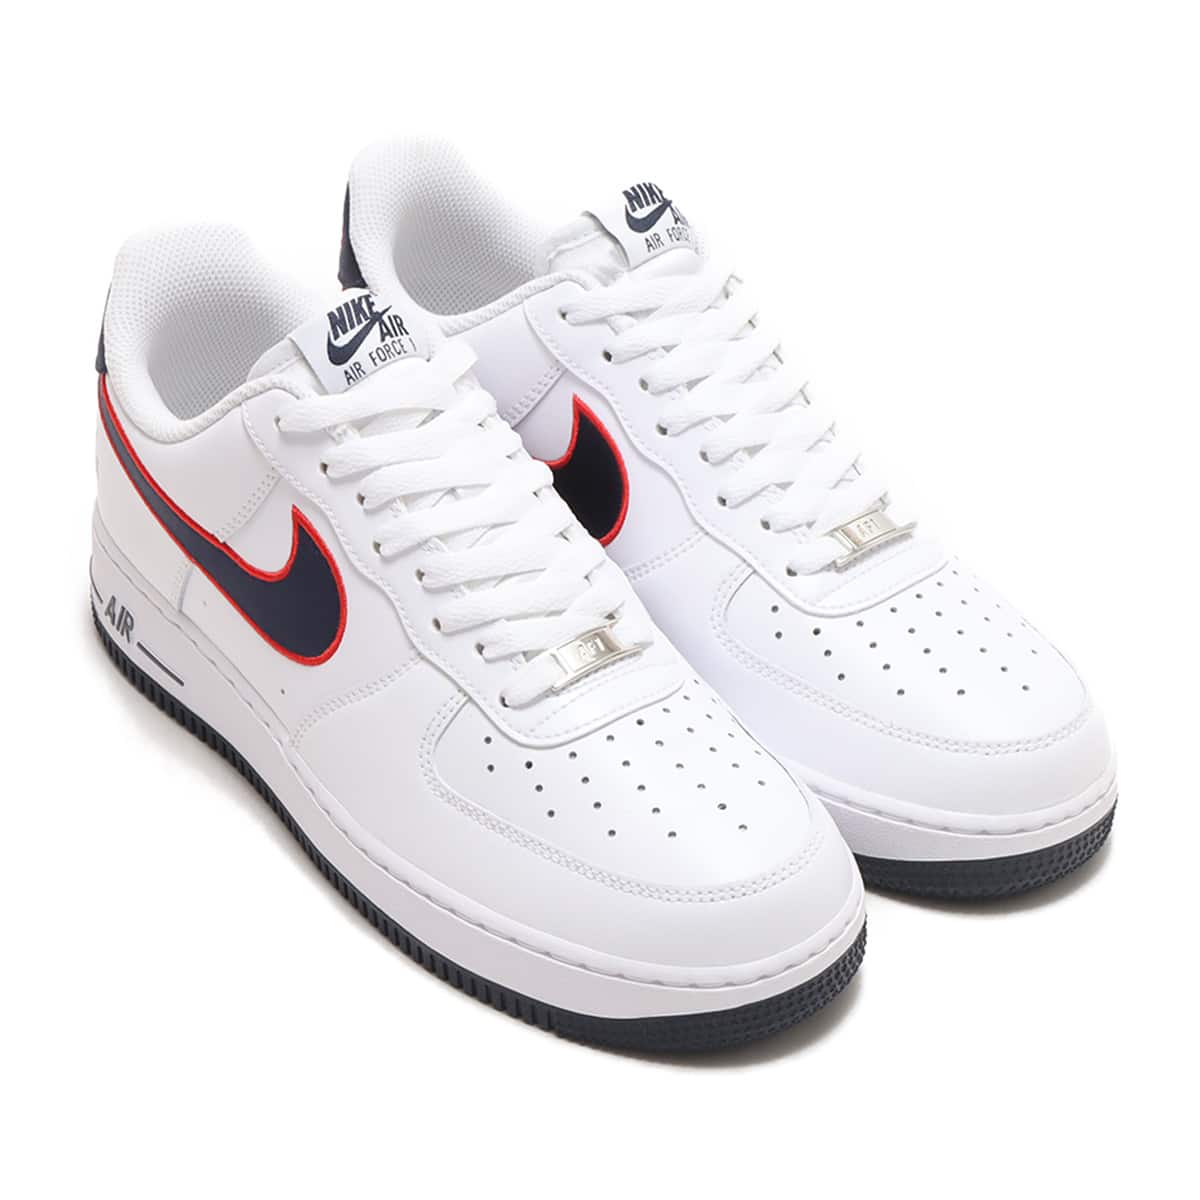 NIKE WMNS AIR FORCE 1 '07 REC WHITE/OBSIDIAN-UNIVERSITY RED-WOLF